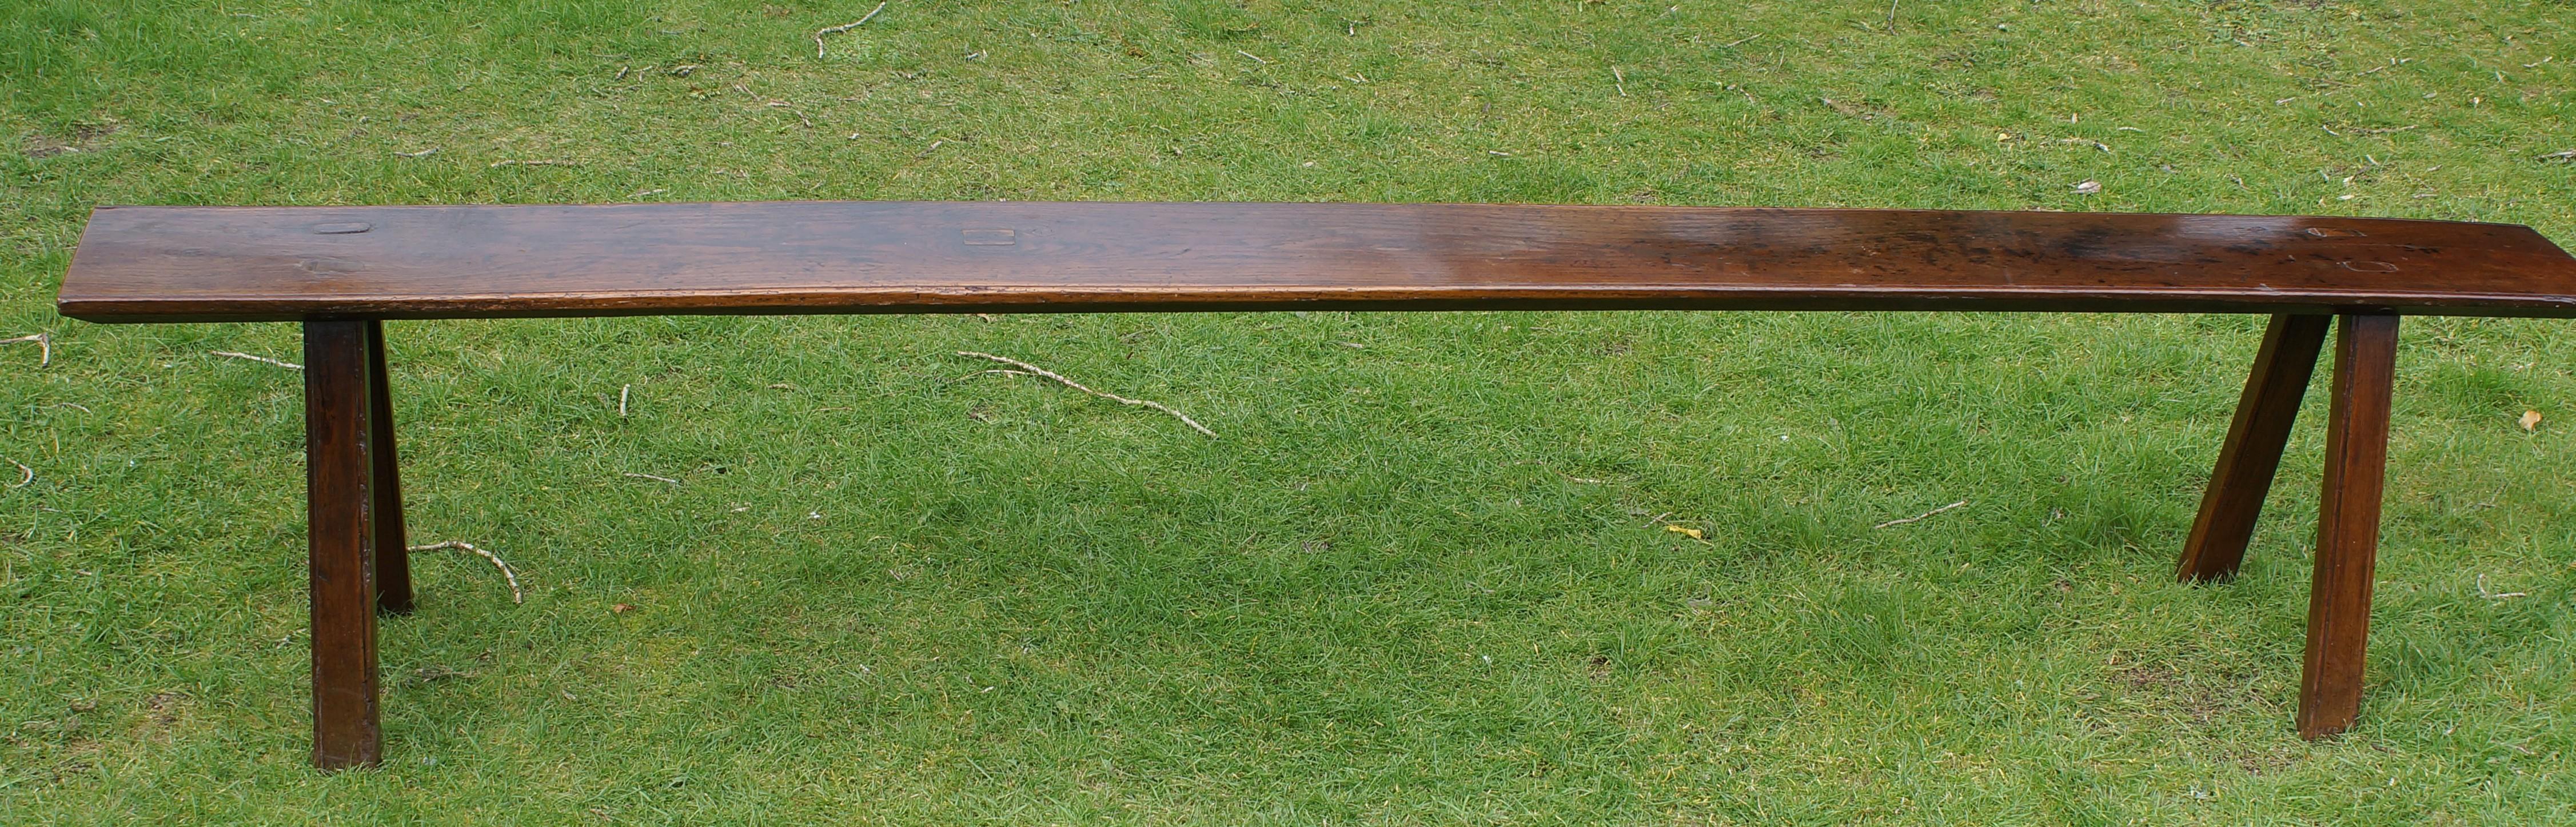 A wonderful bench with a good original finish and rich patina. Having a thick single piece top and four tapered legs.
A good solid bench with a seat width of 25 cm.
Wales 18th century.
This bench would work really well in a long hallway with coats